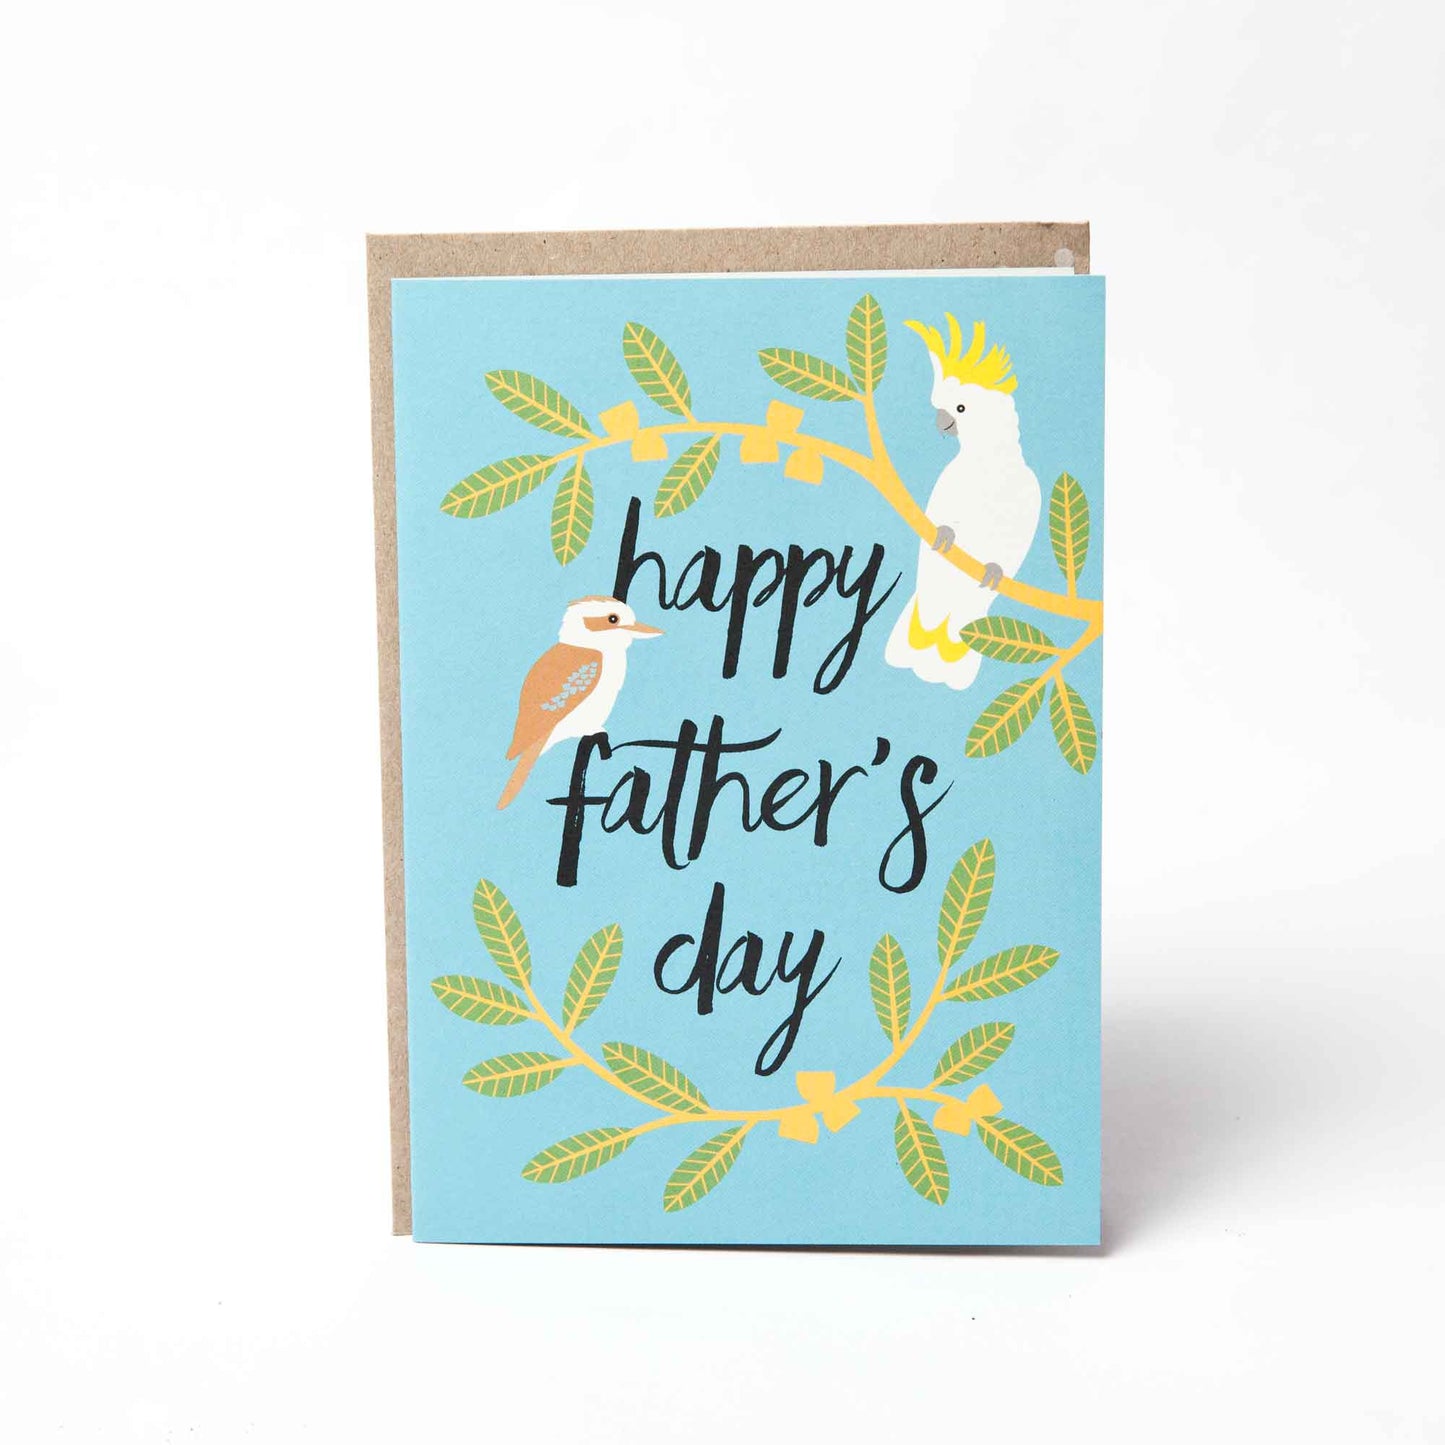 Earth Greetings Eco-friendly and recyclable father's day gift card. Made in Australia.